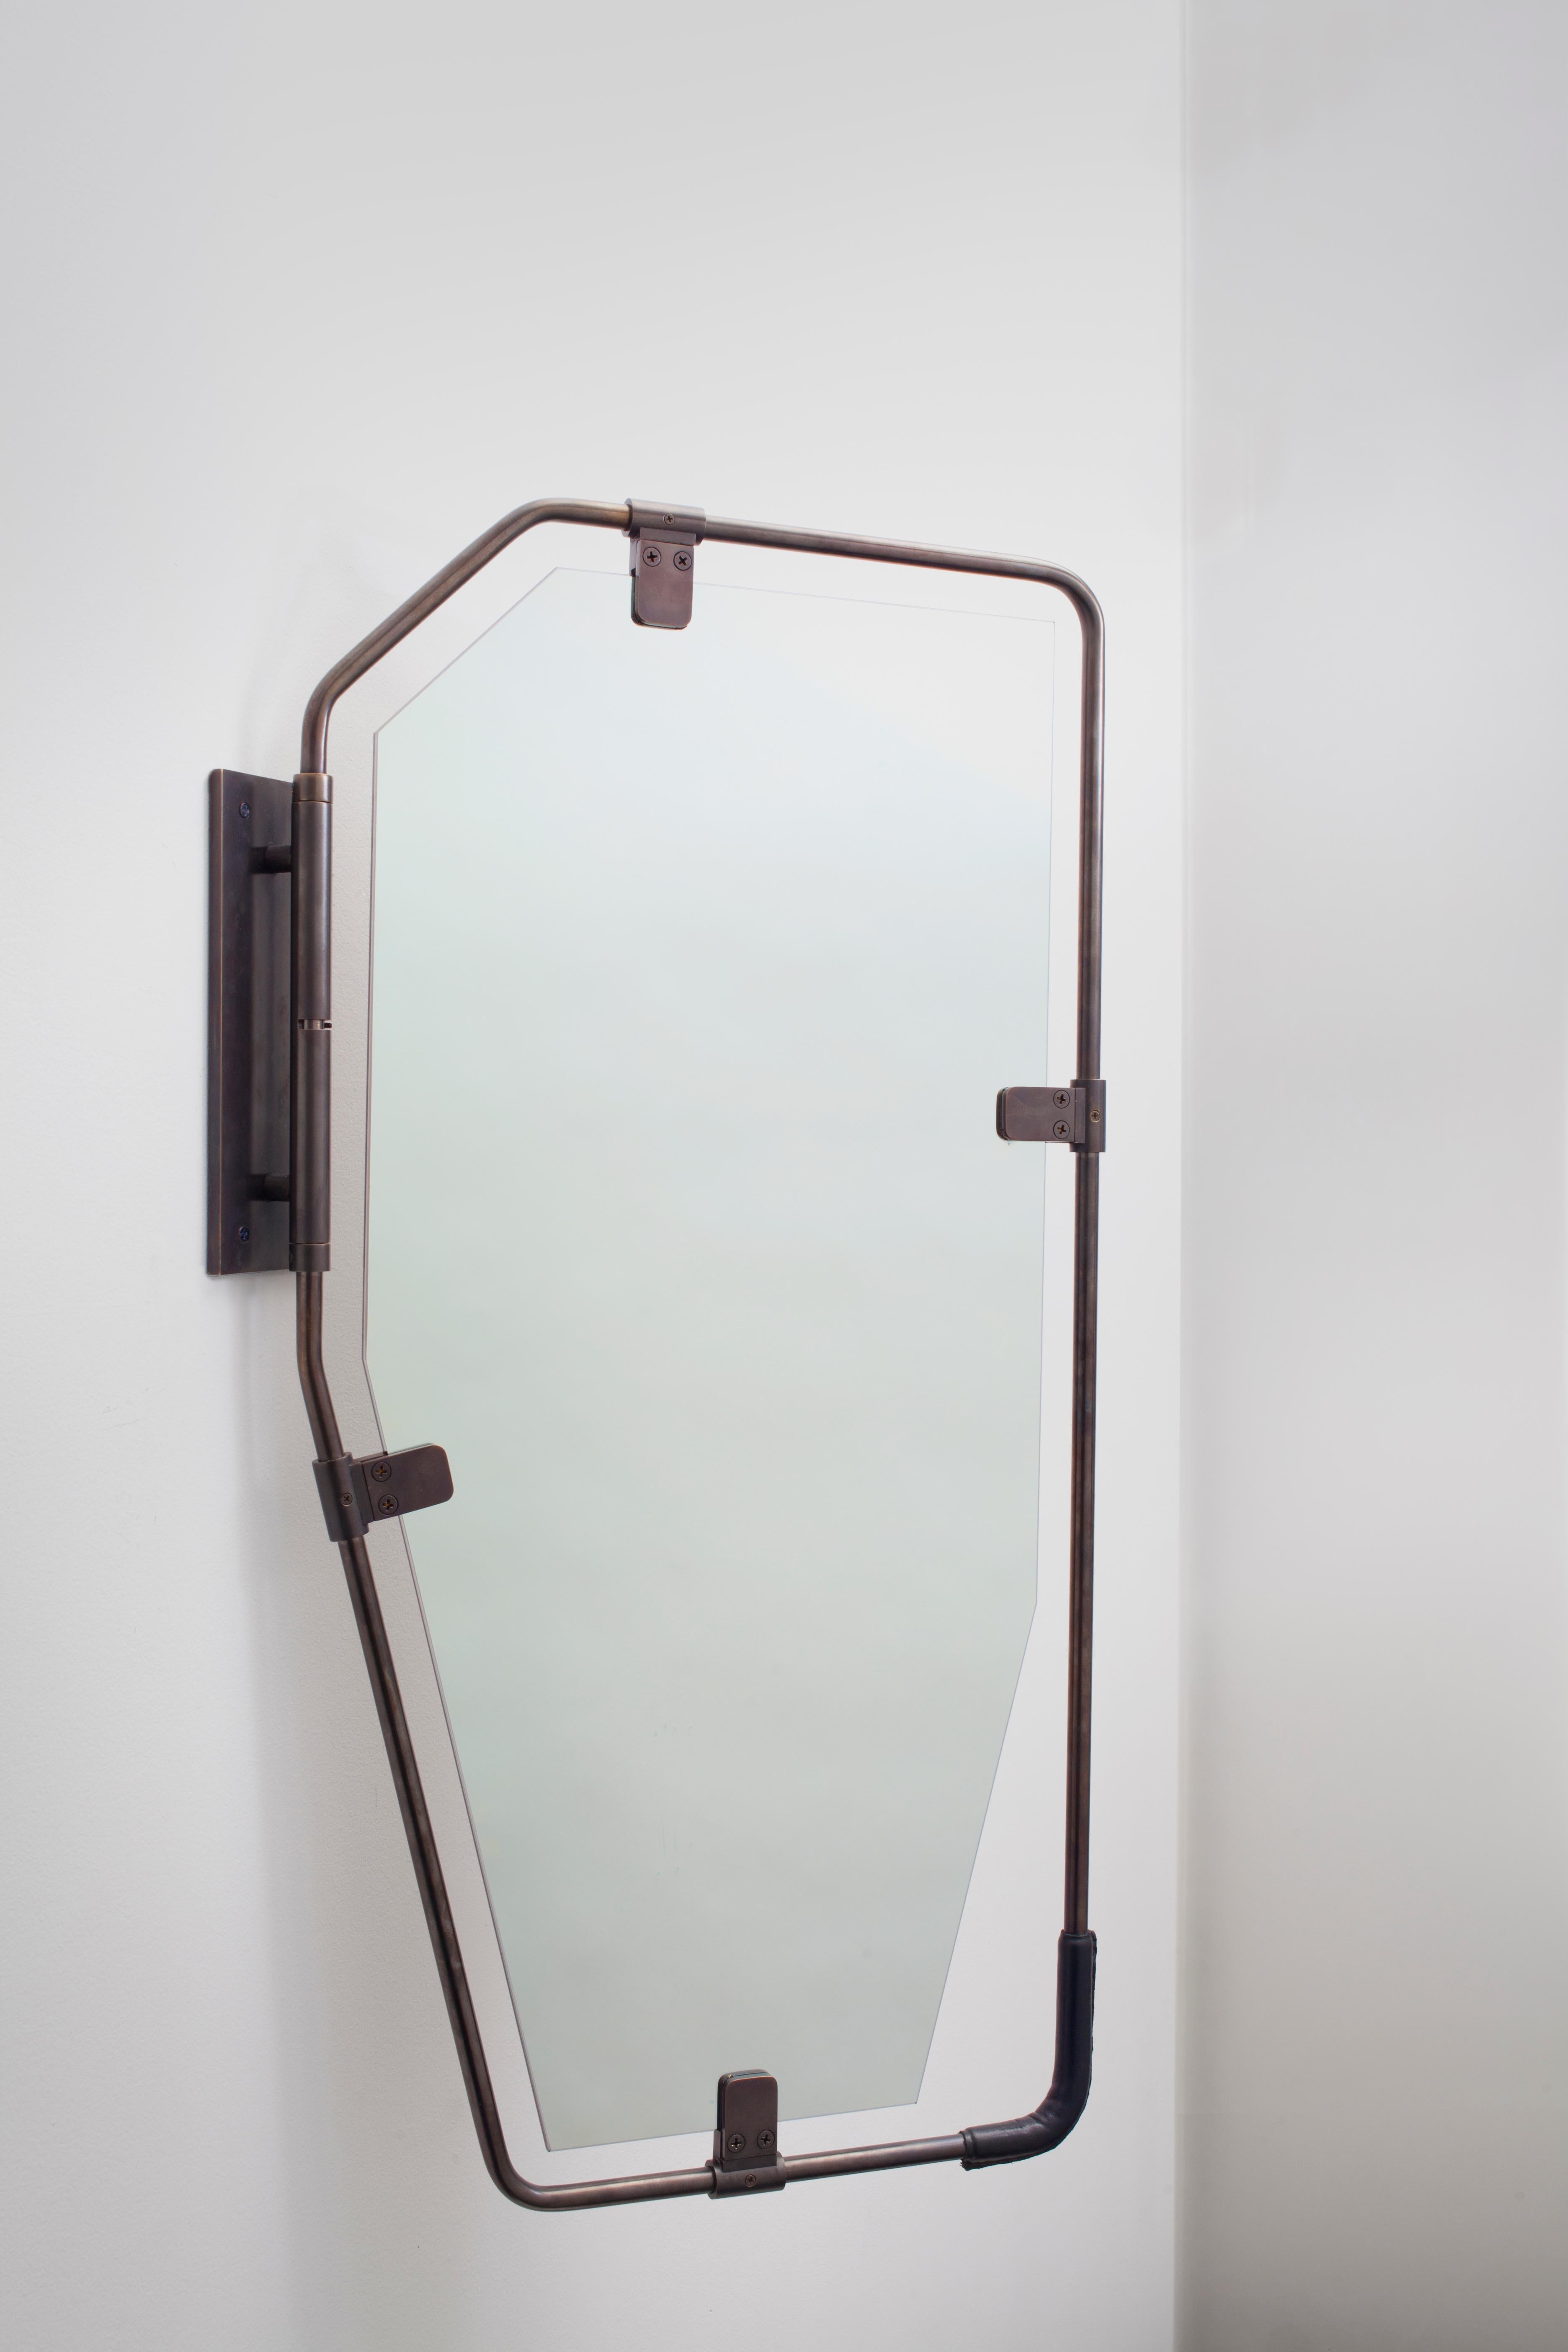 Following the same industrial design language of the Switch Lighting Collection, the Switch Mirror was conceived as a “subtle & social” mirror that can be used in different residential or commercial spaces. 

Utilizing the brass frame and fittings,